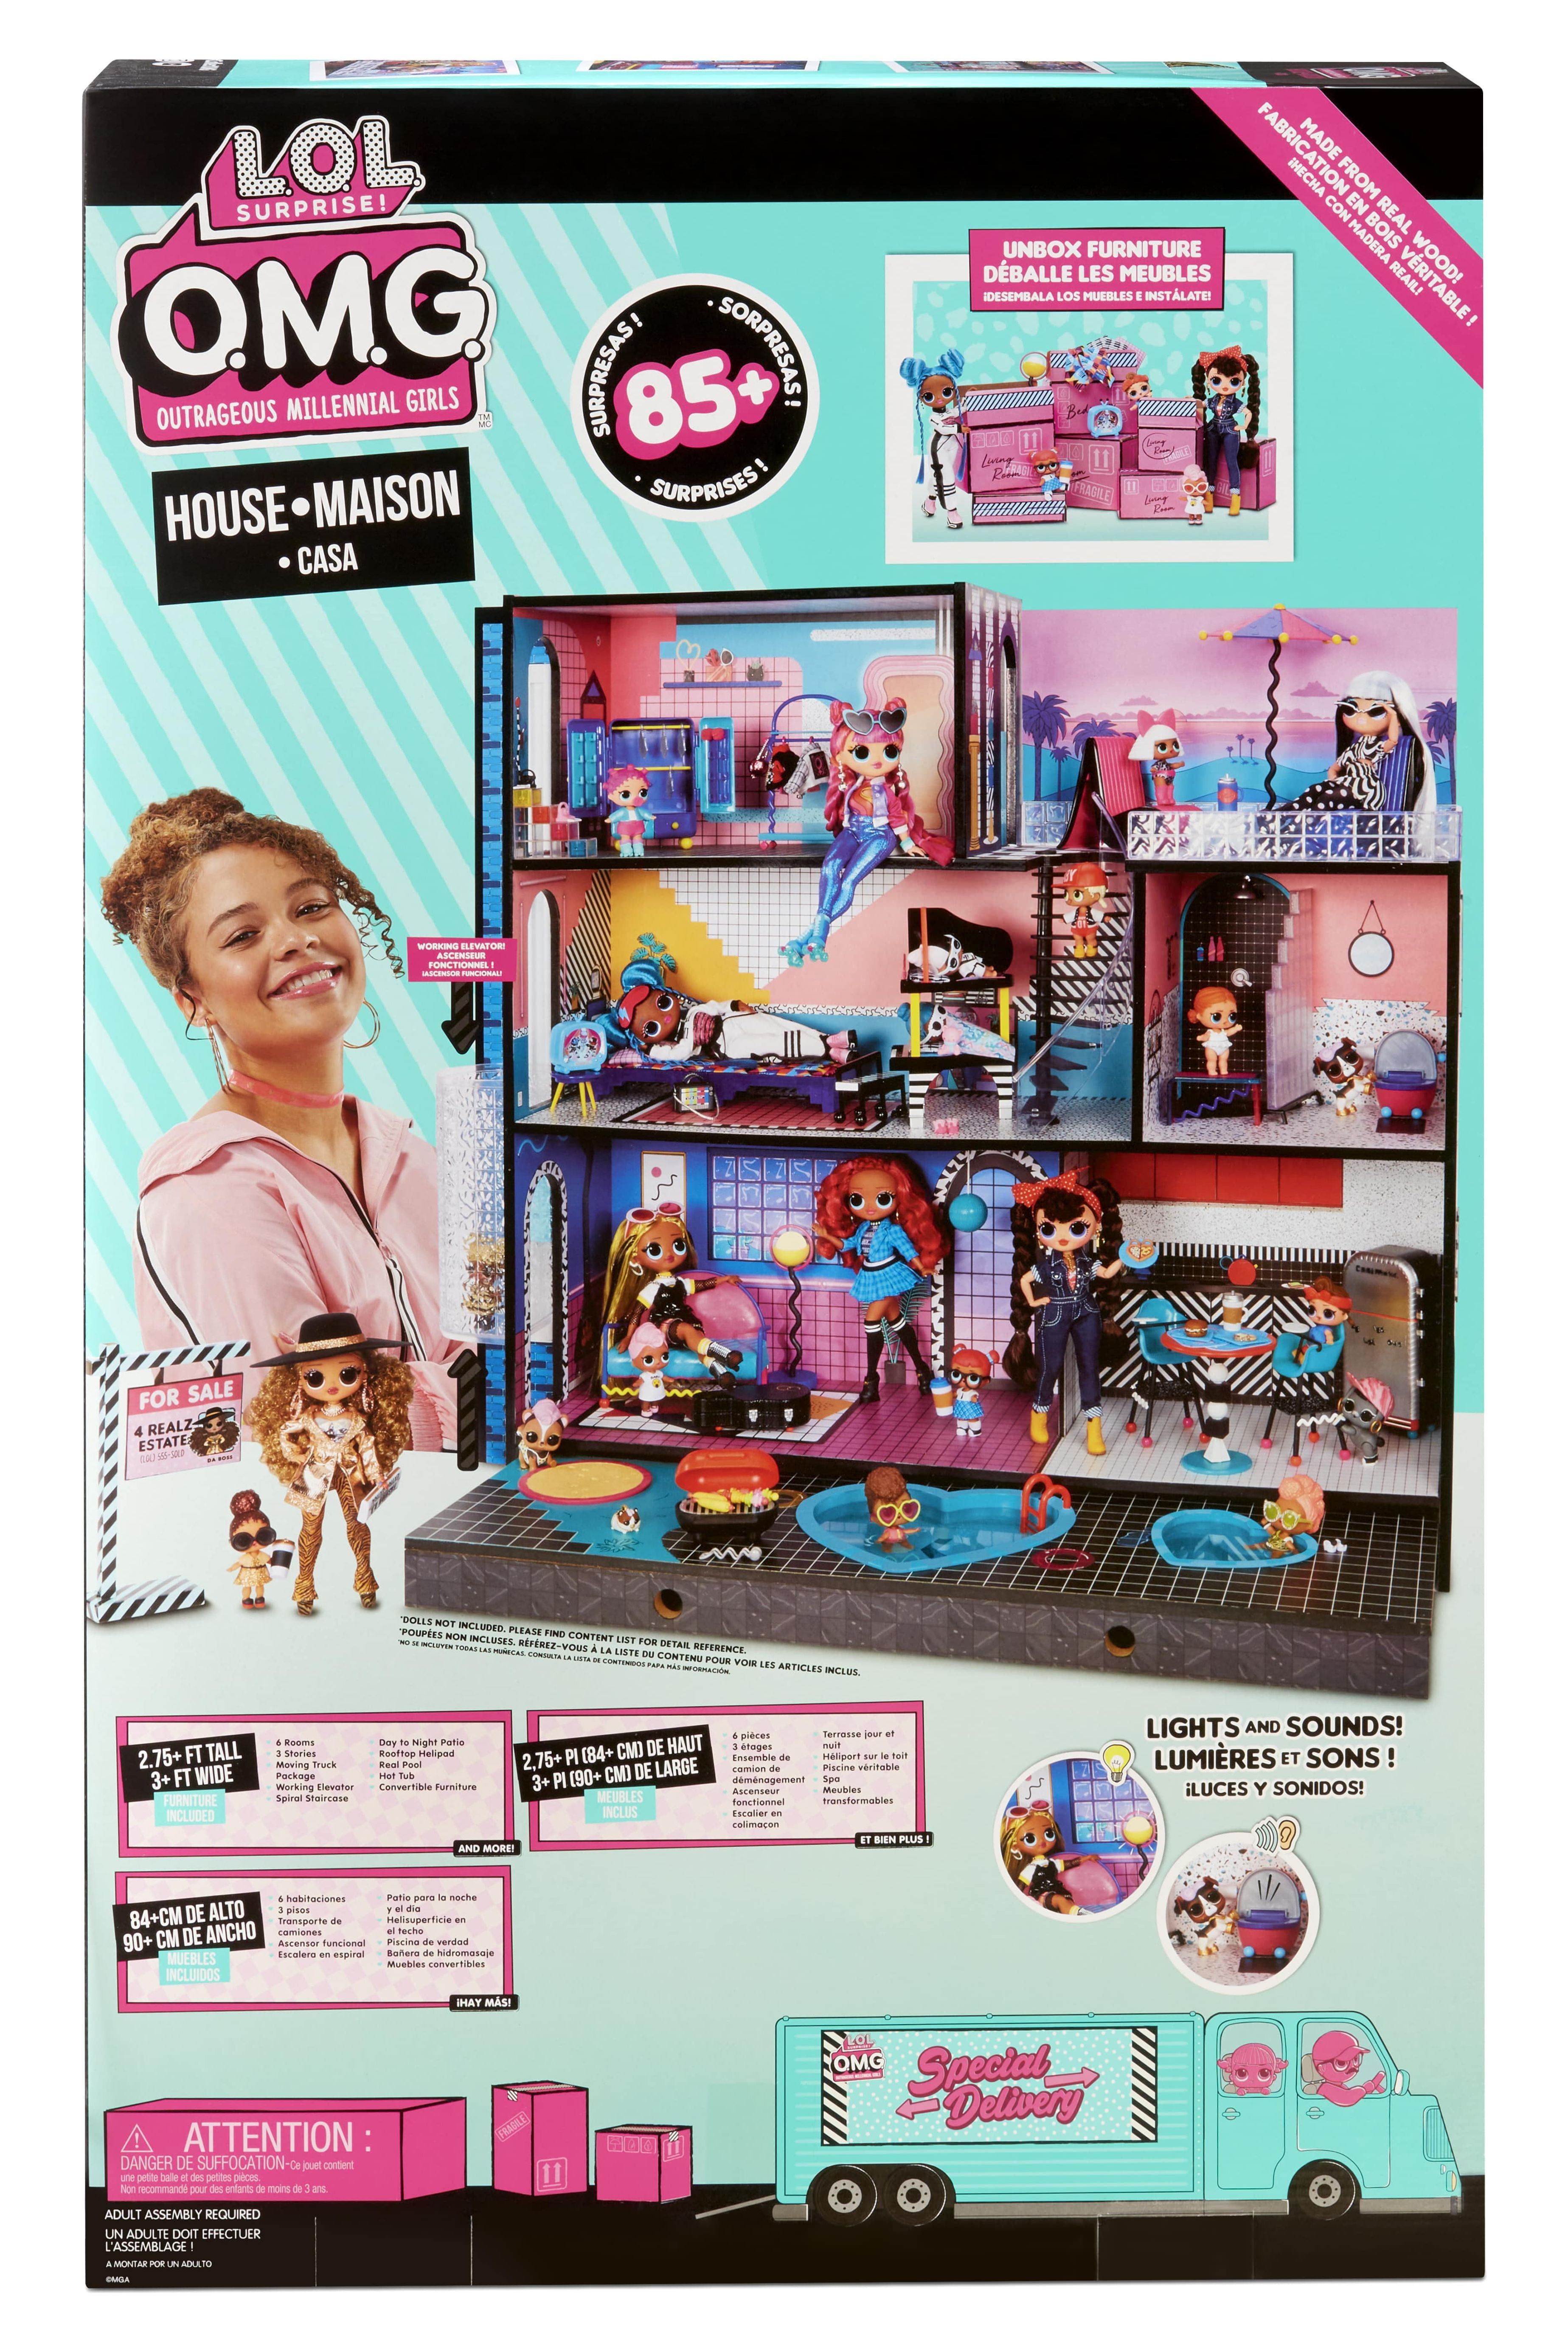  L.O.L. Surprise! OMG House of Surprises – Real Wood Dollhouse  with 85+ Surprises, 4 Floors, 10 Rooms, Elevator, Spiral Slide, Pool, Movie  Theater Drive Thru, Rooftop- Toy Gift for Girls Ages